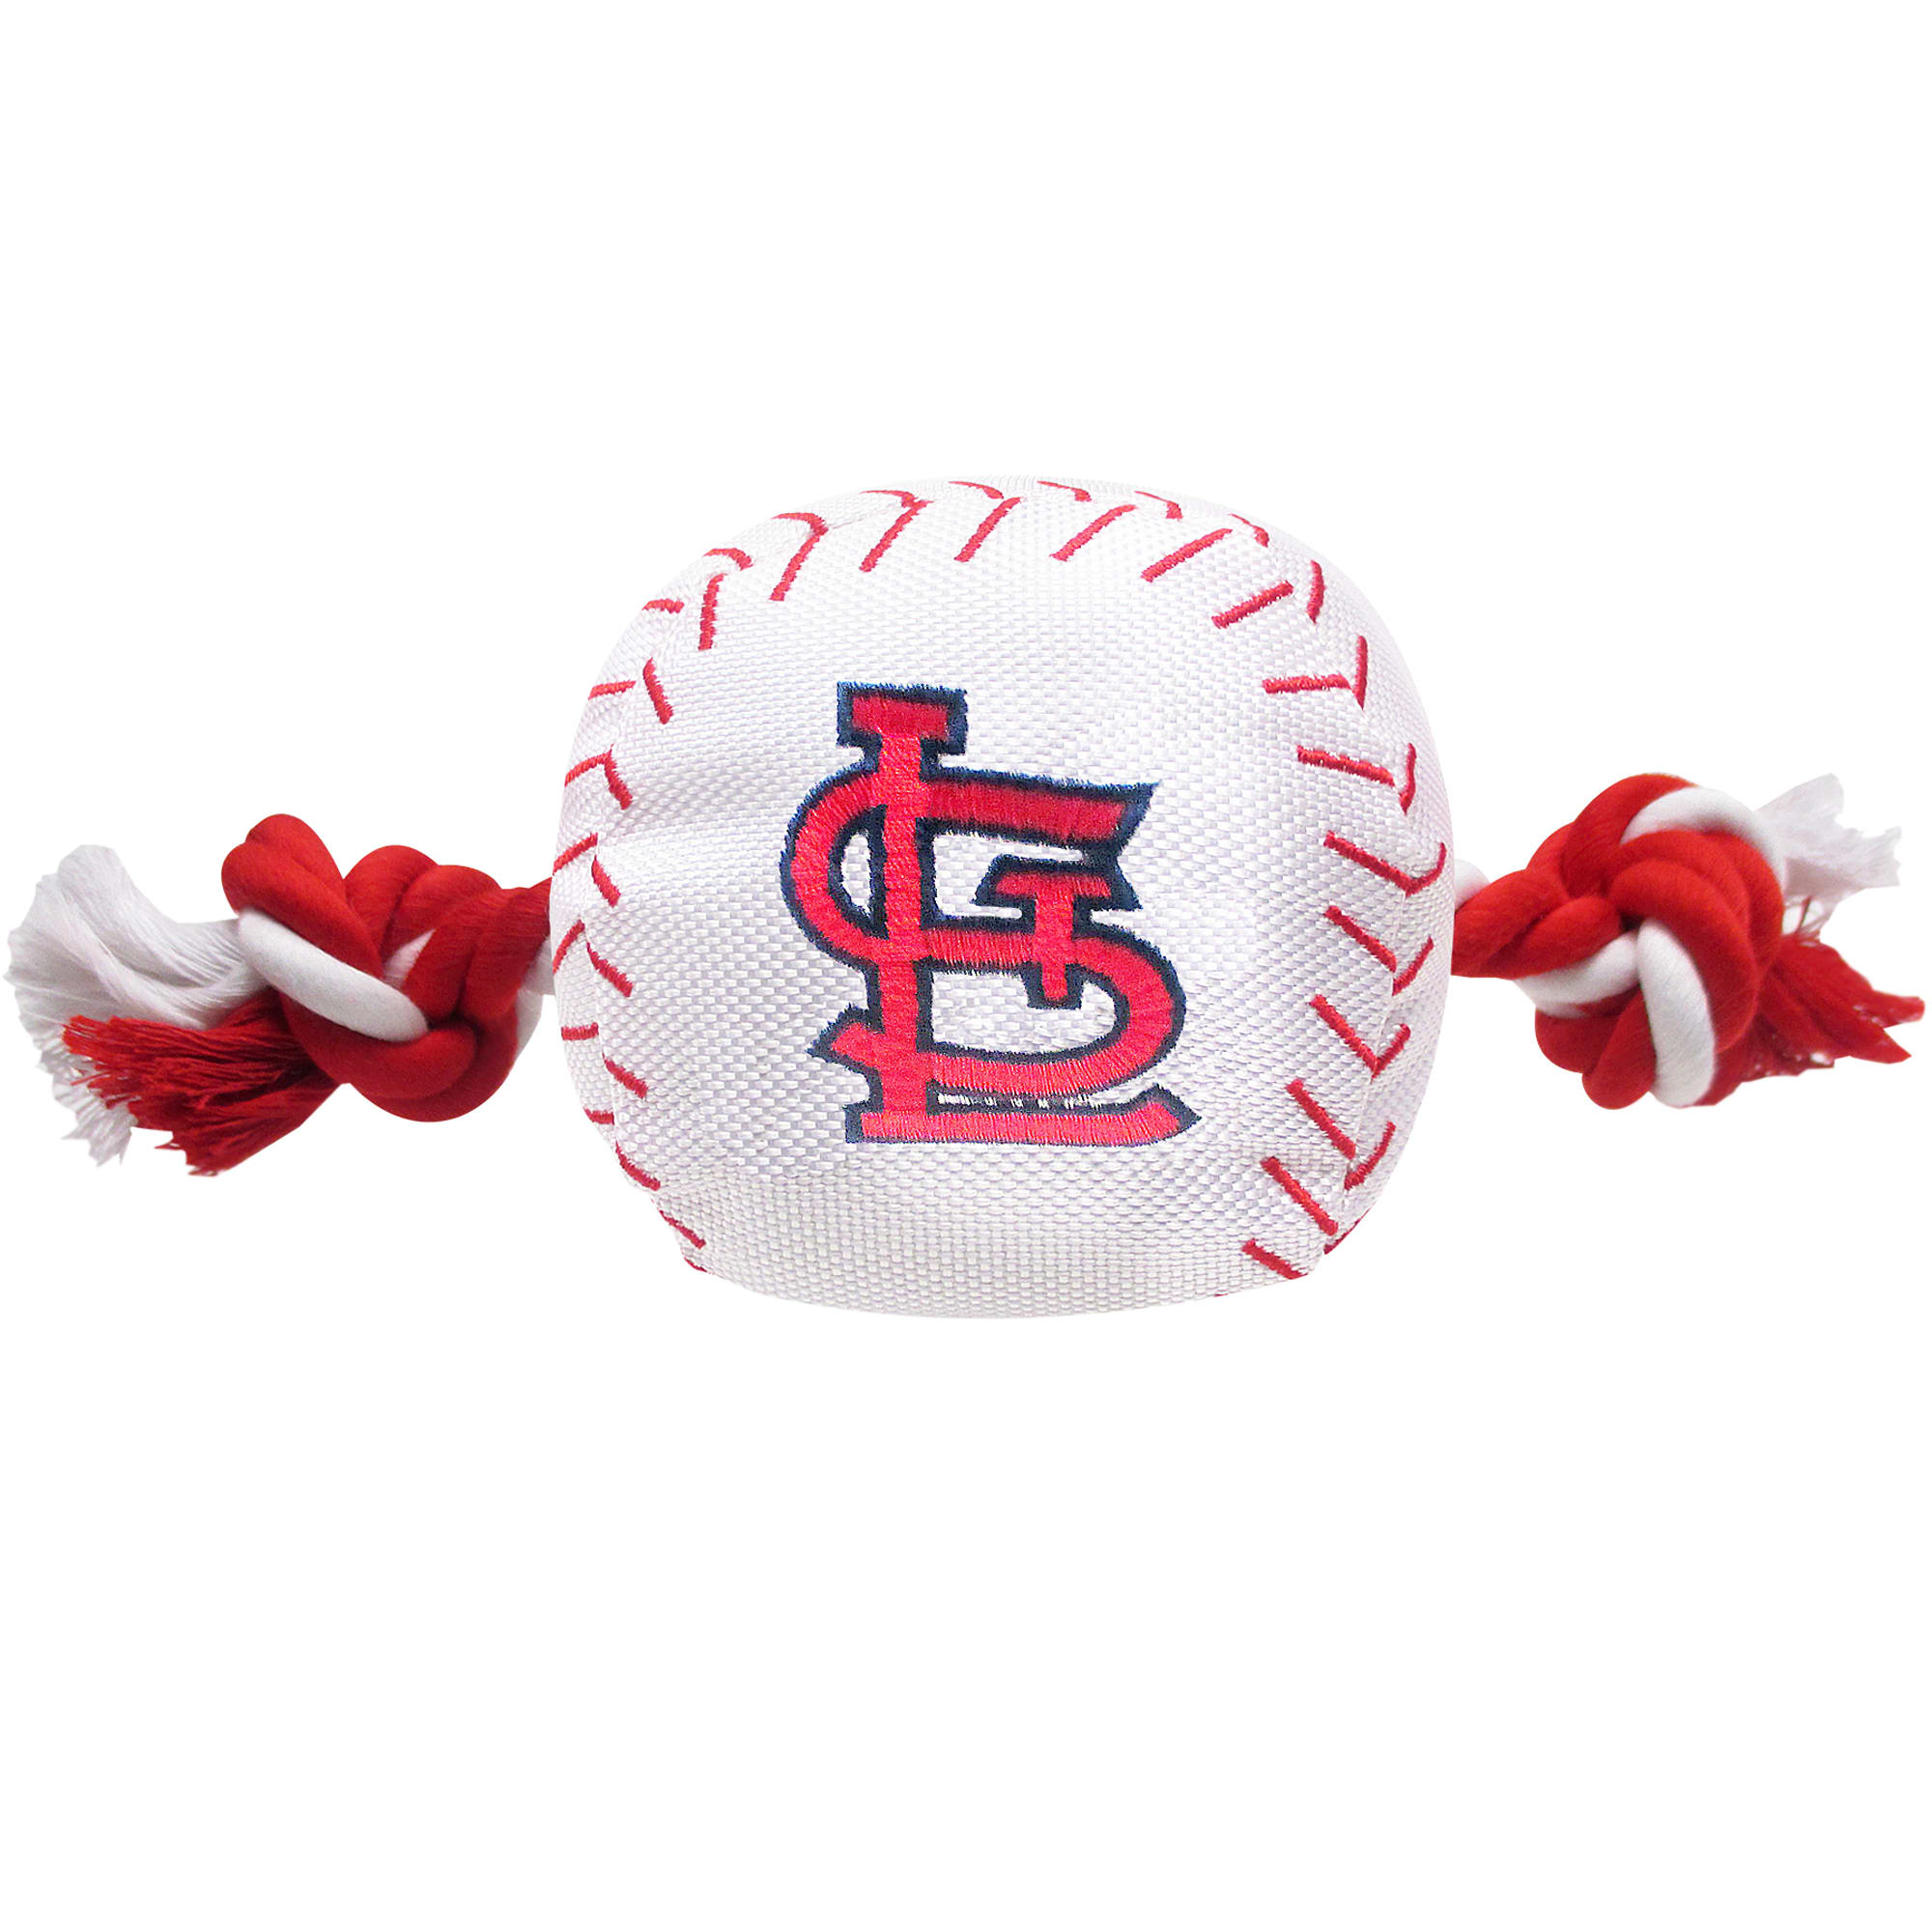 CD St. Louis Cardinals Baseball Bracelet - Red Band, White Stiches StL  Logo--(Package of 2)